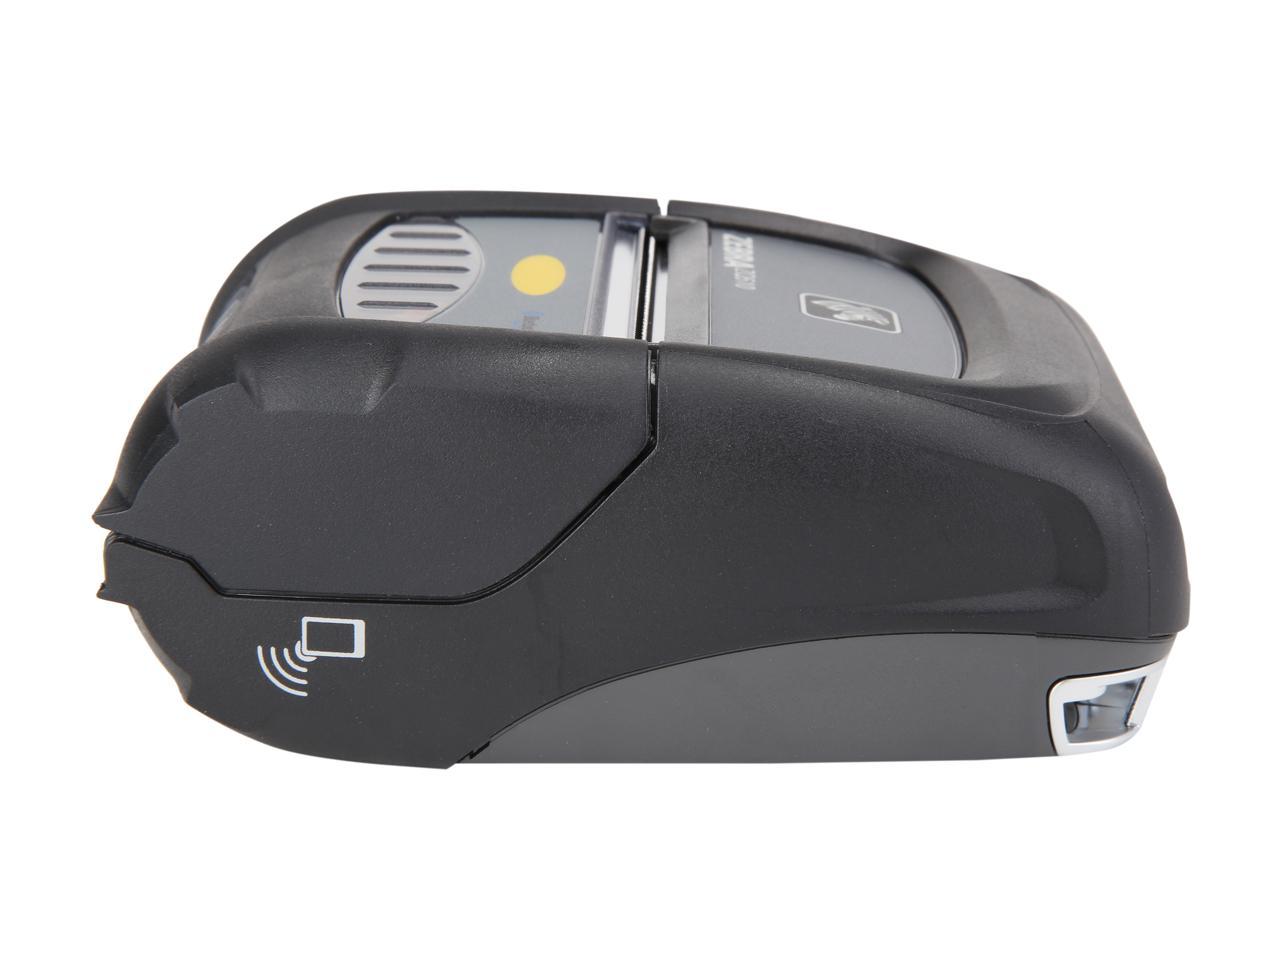 Zebra Zq510 3 Mobile Direct Thermal Receipt And Label Printer 203 Dpi Bluetooth 40 Linered 1273